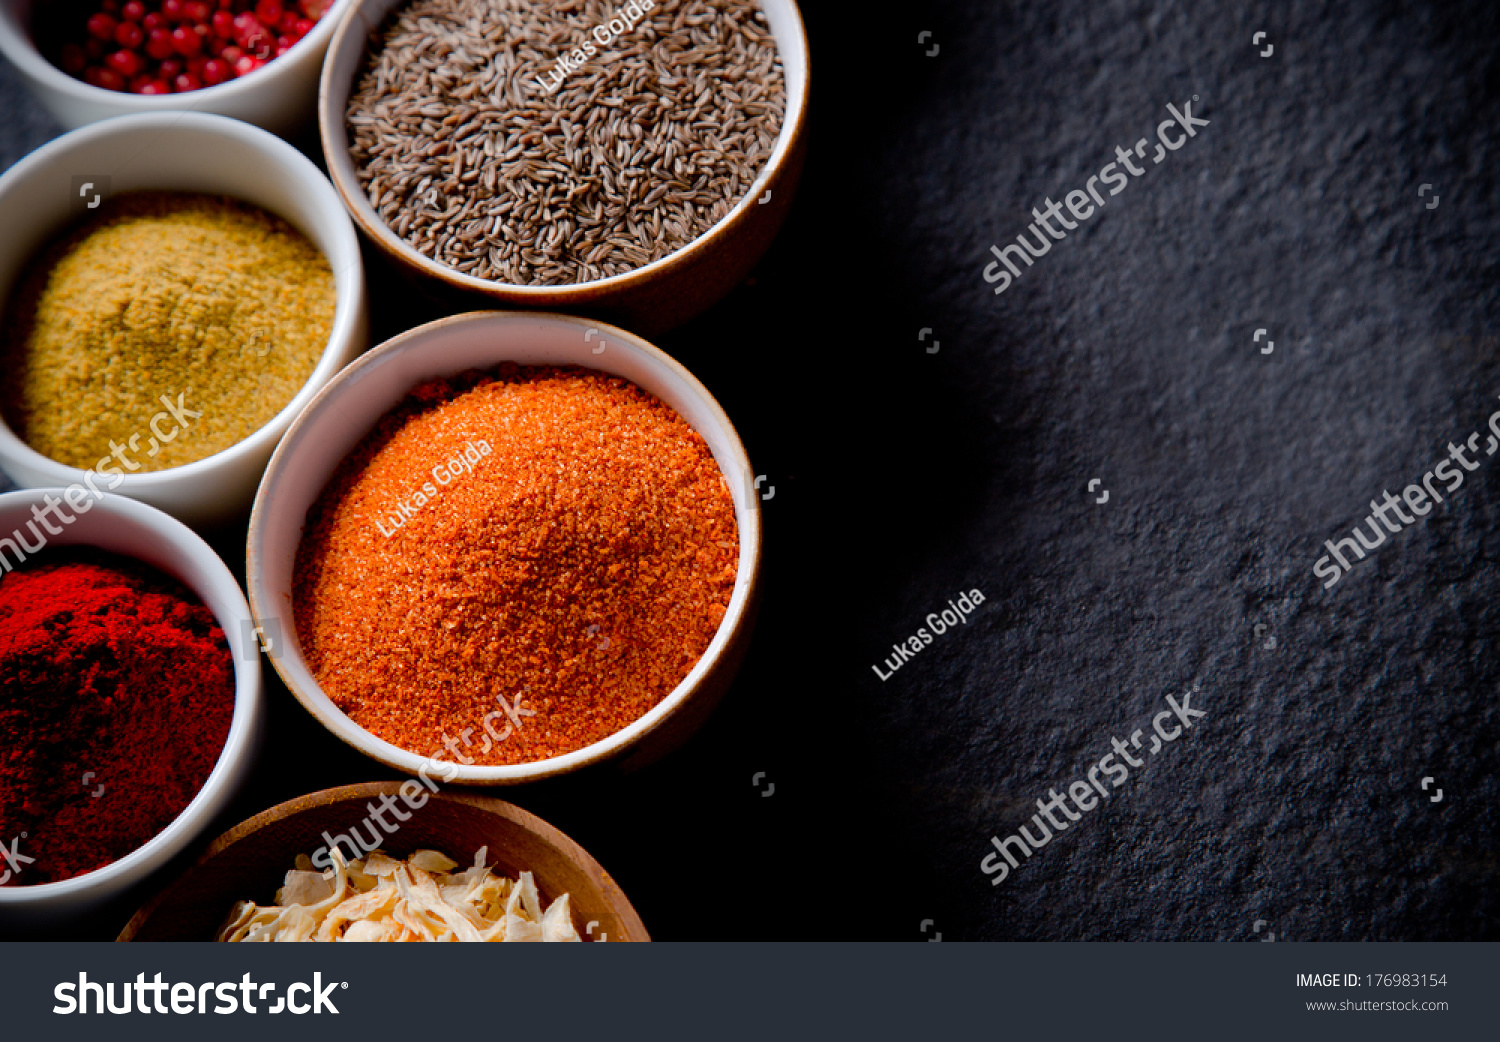 Assorted spices on stone background #176983154